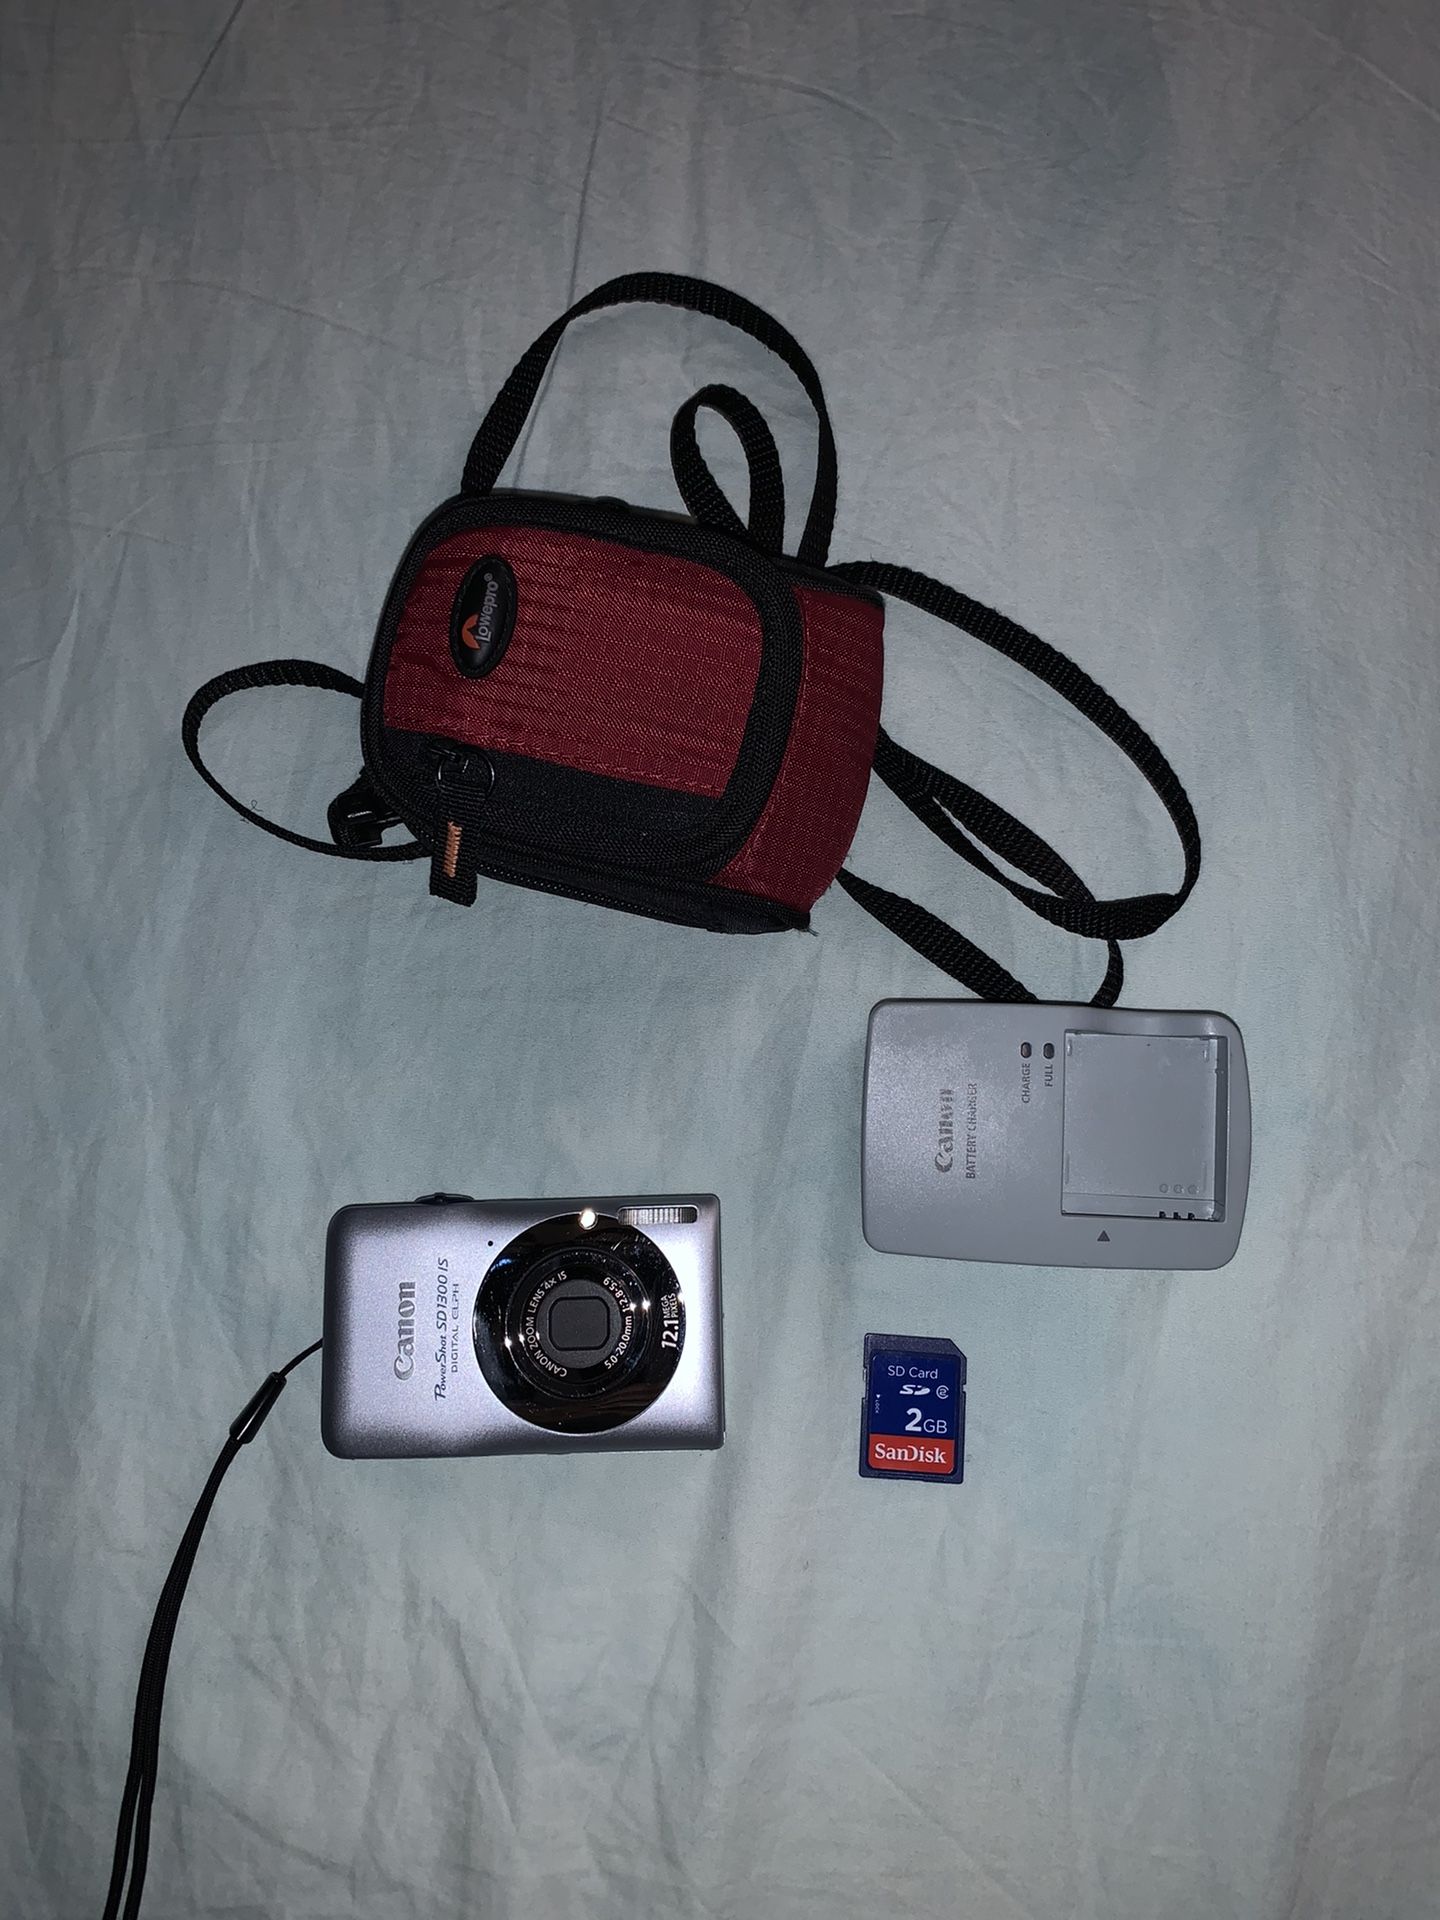 Canon PowerShot 12.1 mega pixels with 2GB memory card and travel bag